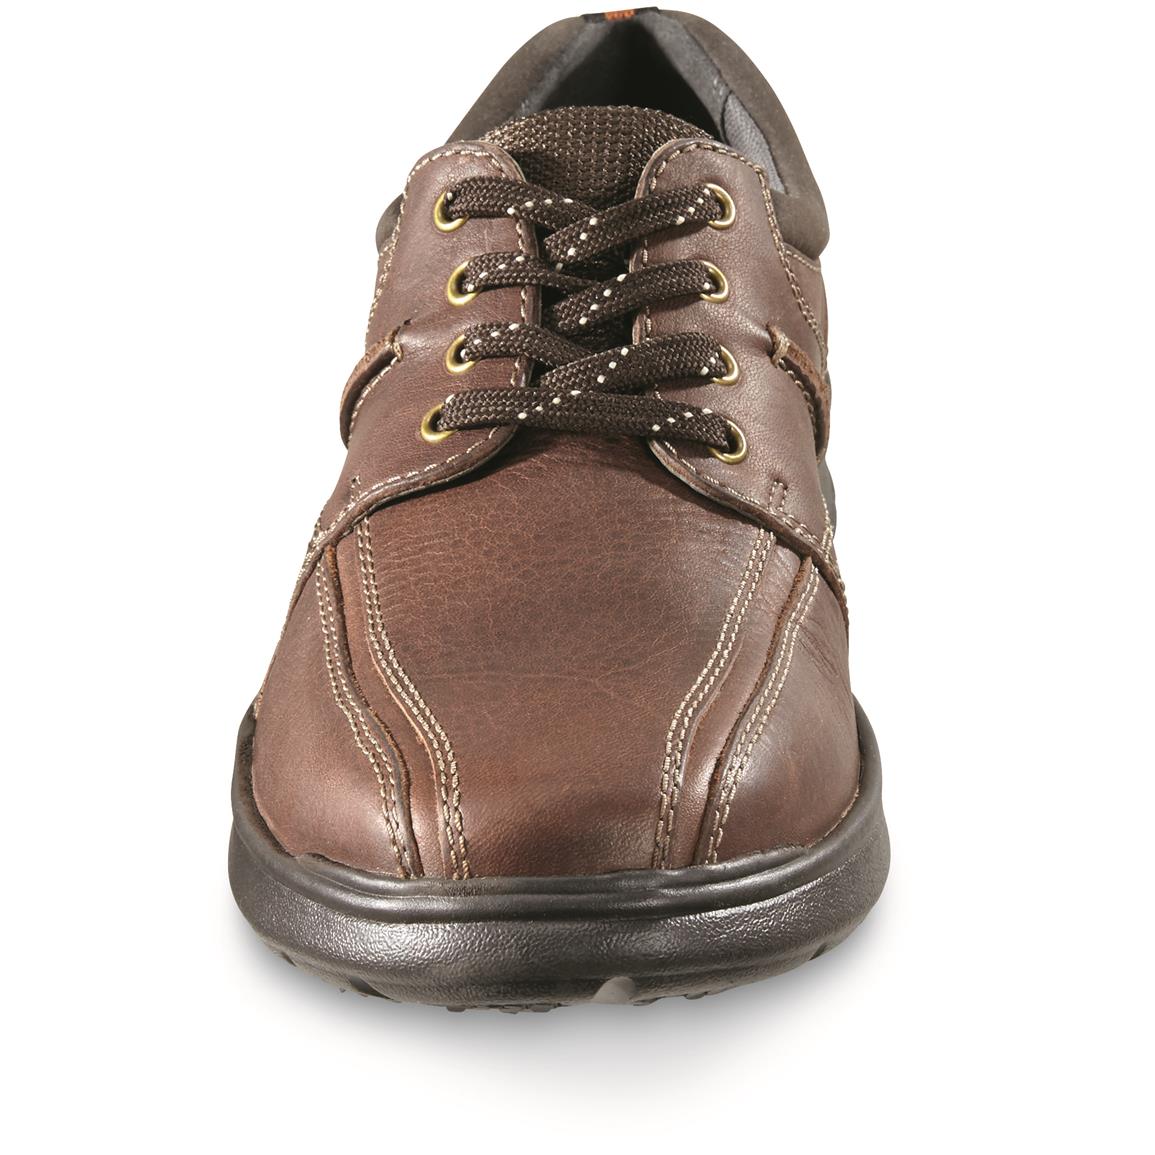 Clarks Men's Cottrell Edge Walking Shoes - 680850, Casual Shoes at Sportsman's Guide